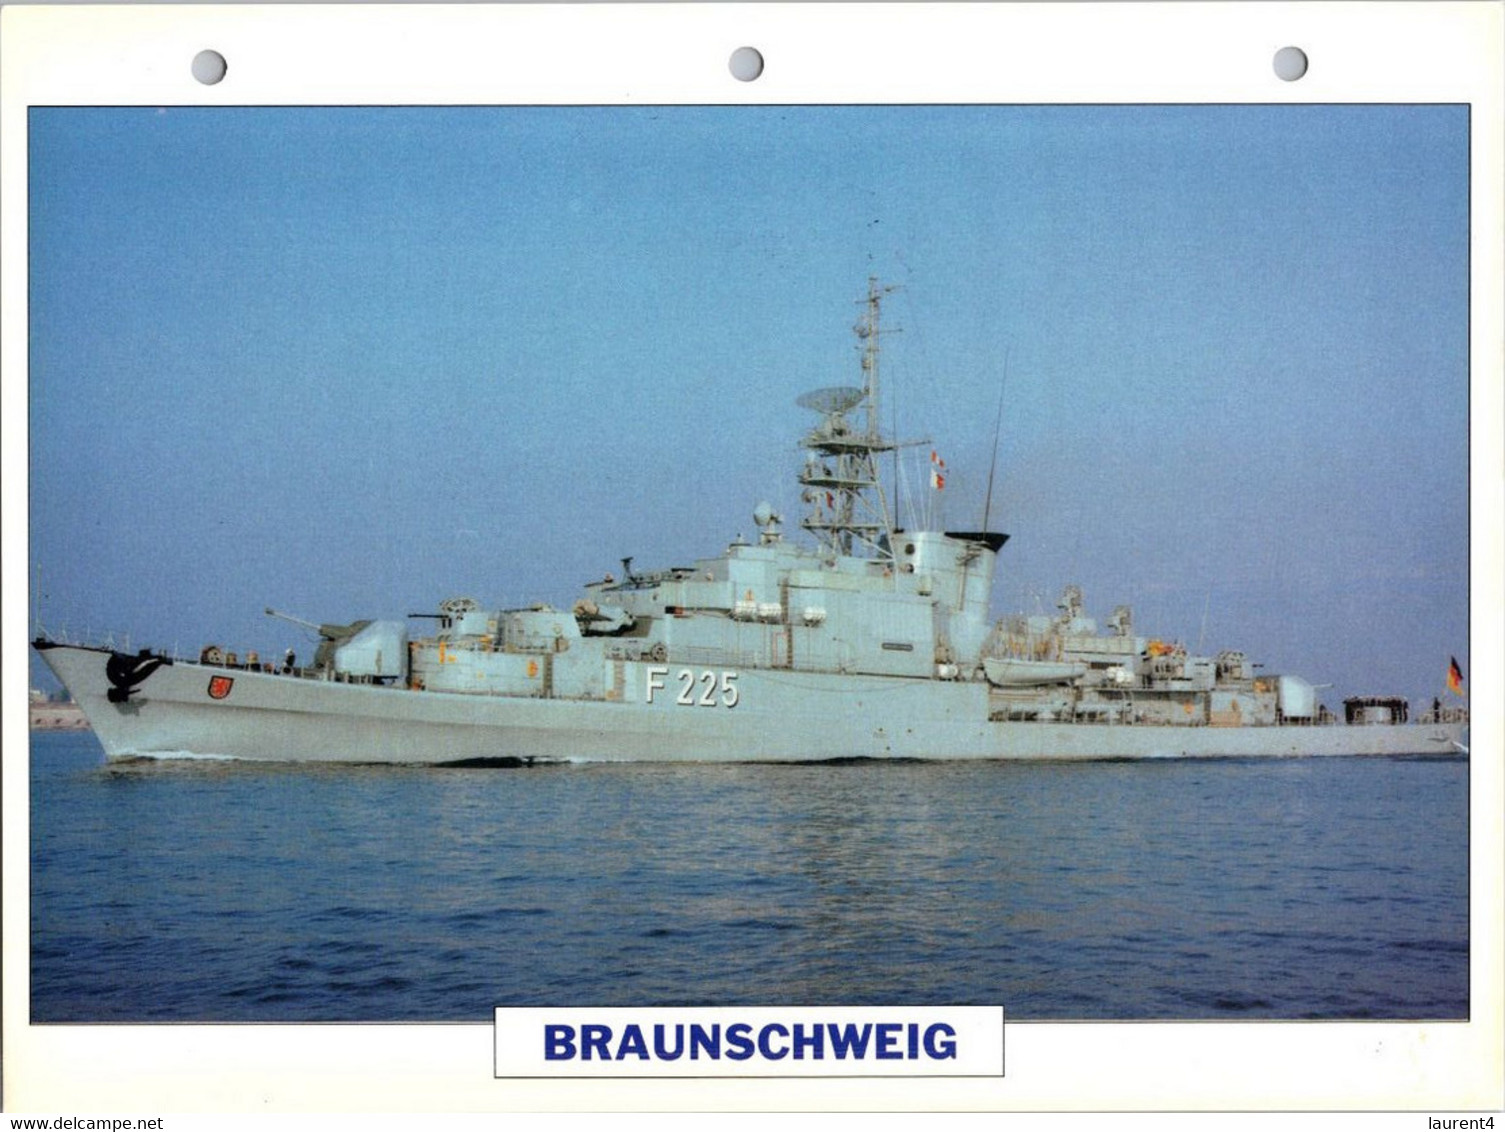 (25 X 19 Cm) (29-9-2021) - V - Photo And Info Sheet On Warship -  Germany Navy - Braunshweig - Bateaux